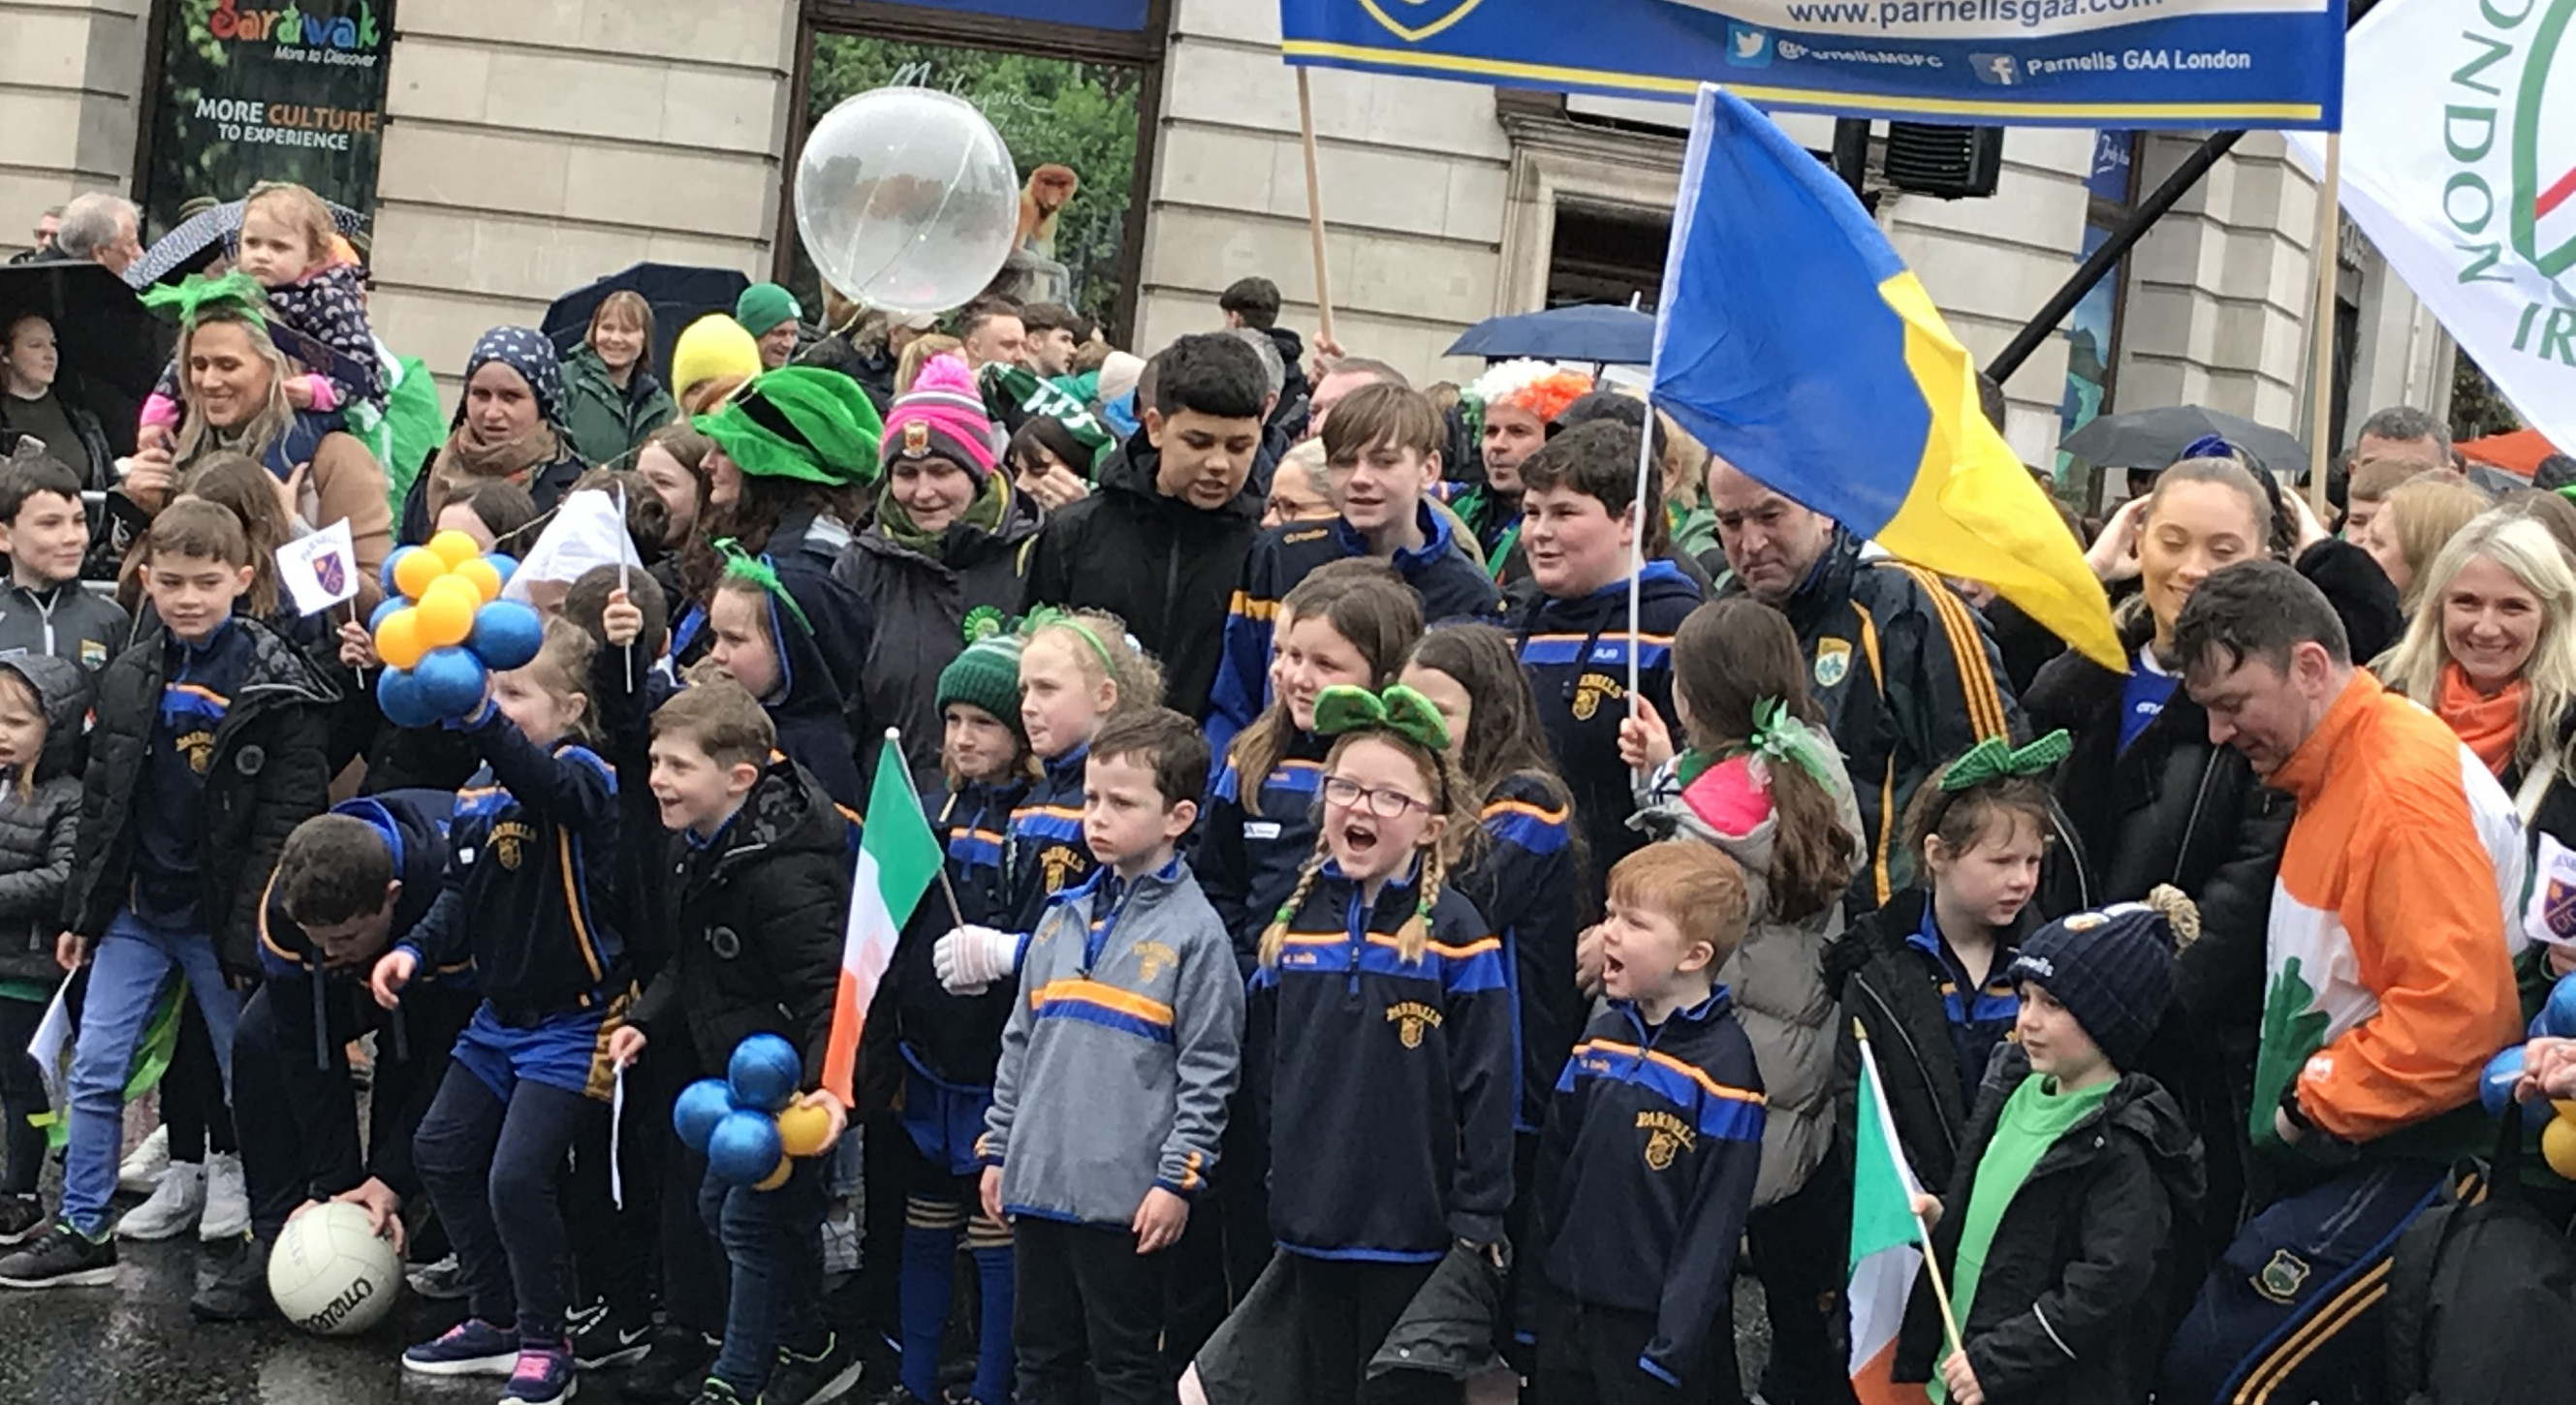 Lots of school children joined the parade